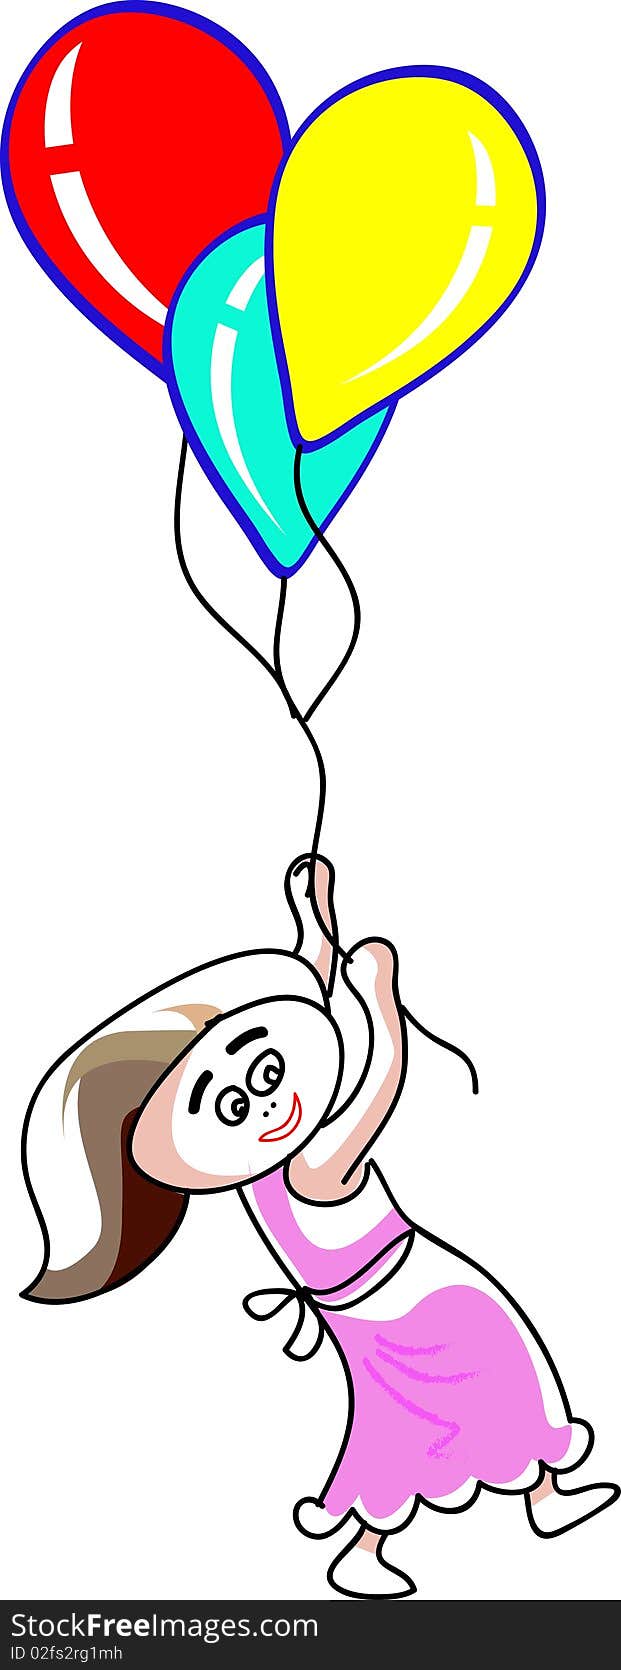 Baby flying with balloons illustrated cartoon